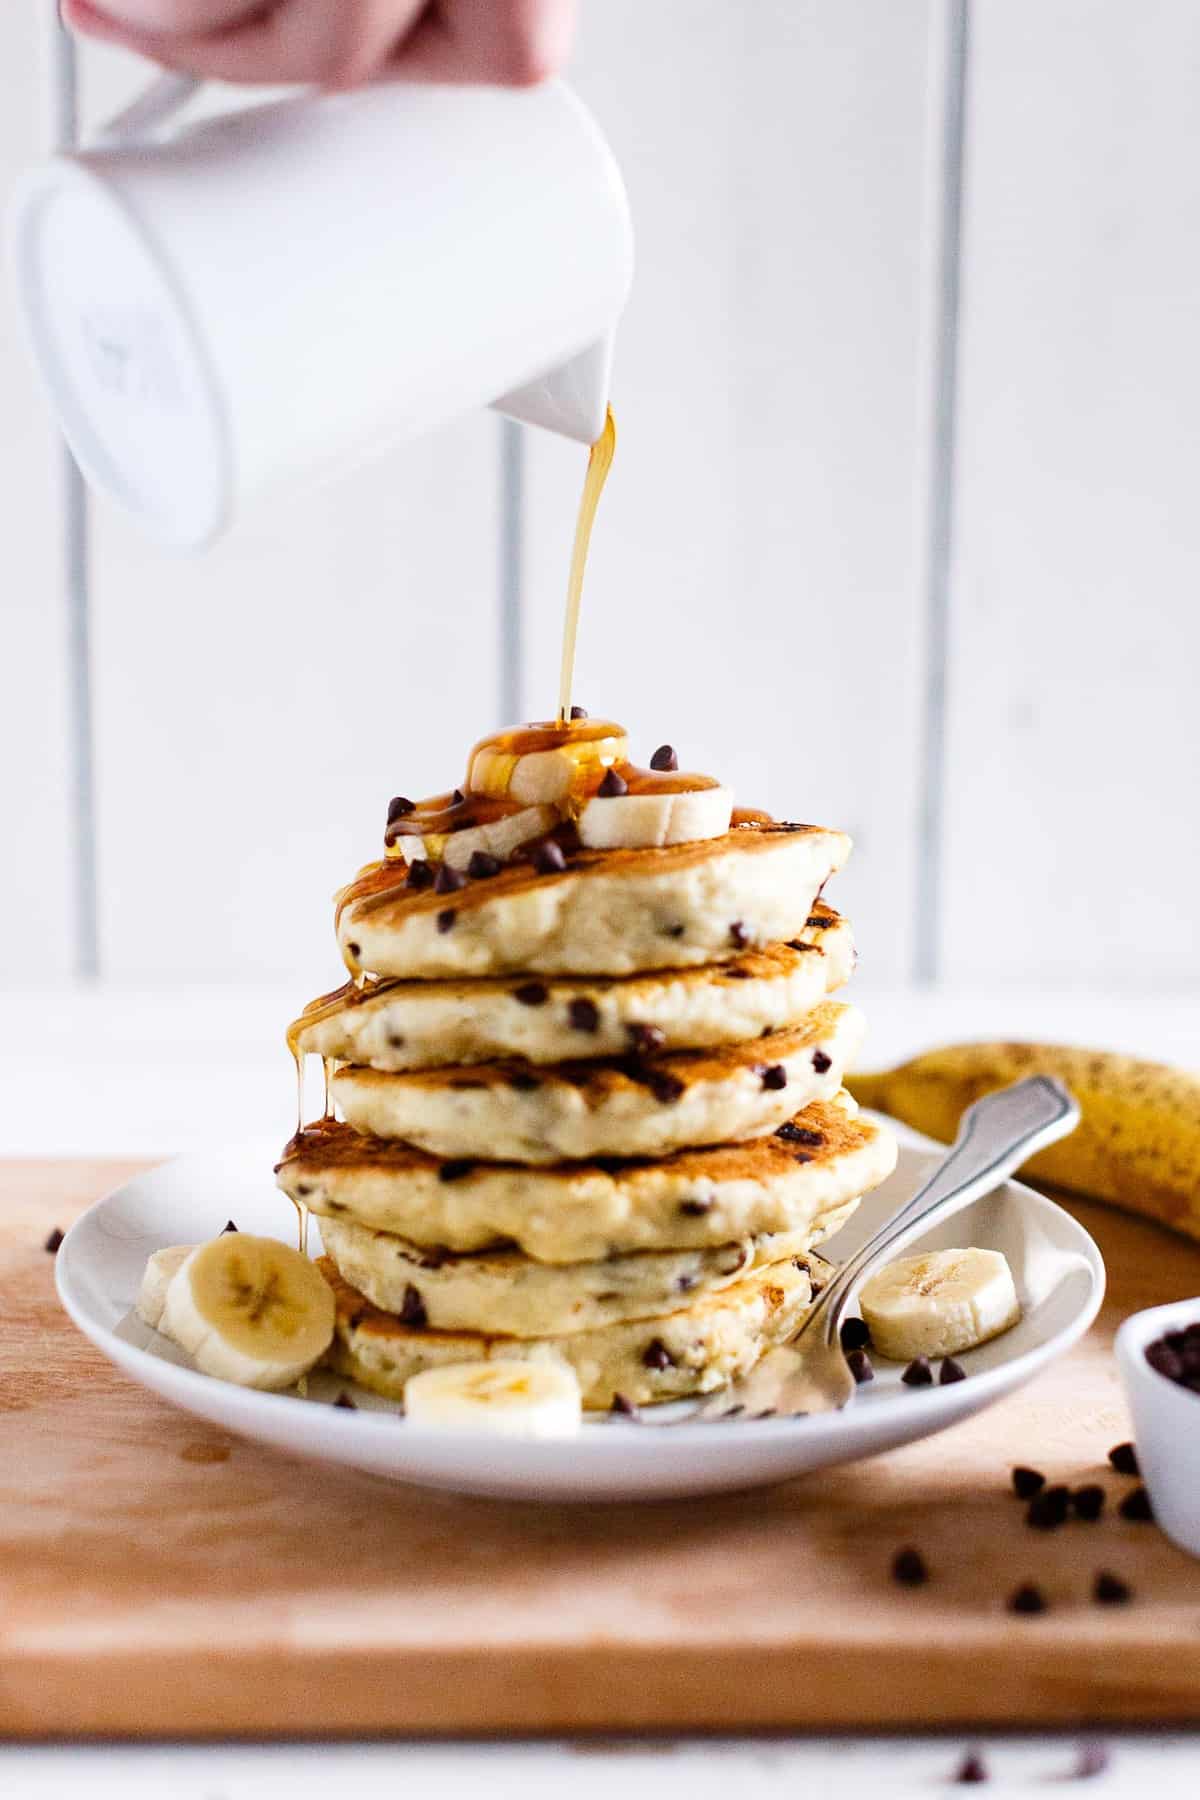 Pouring maple syrup on a stack of vegan chocolate chip pancakes topped with sliced bananas.